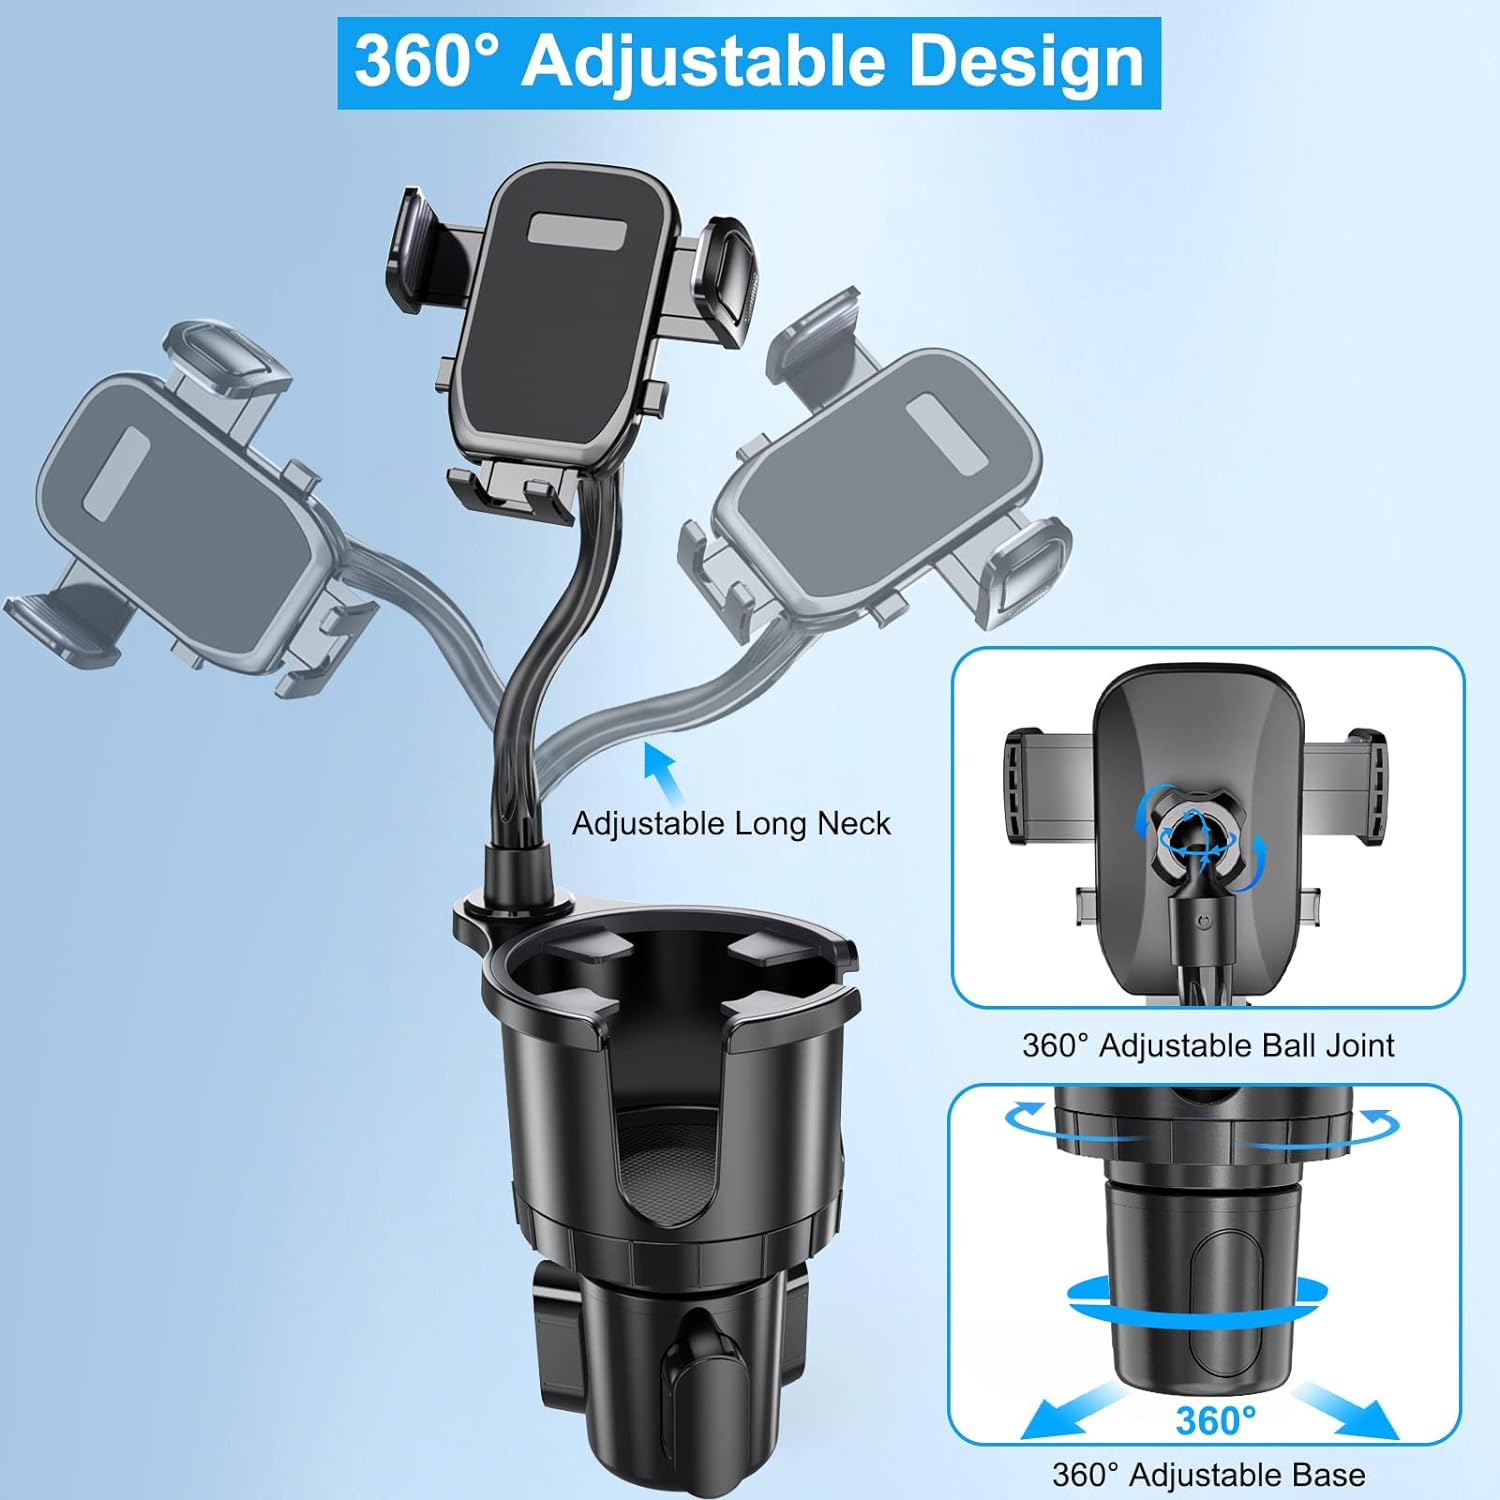 Car Cup Holder Phone Mount, 2 in 1 Adjustable Cup Holder Expander with 360° Rotation Base, Multifunctional Large Cup Organizer Phone Holder for Car Fits All Smartphones